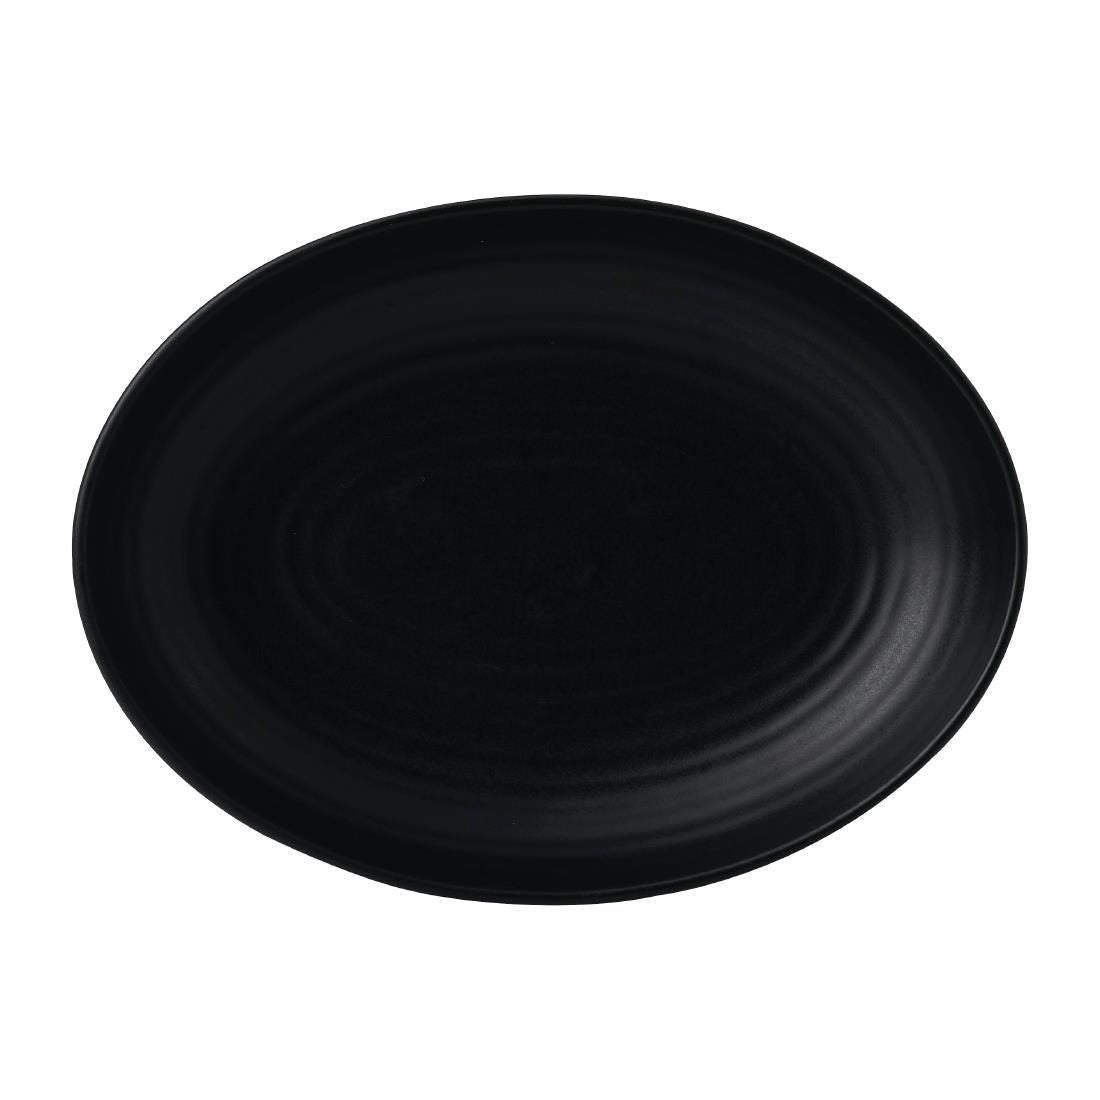 FE316 Dudson Evo Jet Deep Oval Bowl 267 x 196mm (Pack of 6) JD Catering Equipment Solutions Ltd